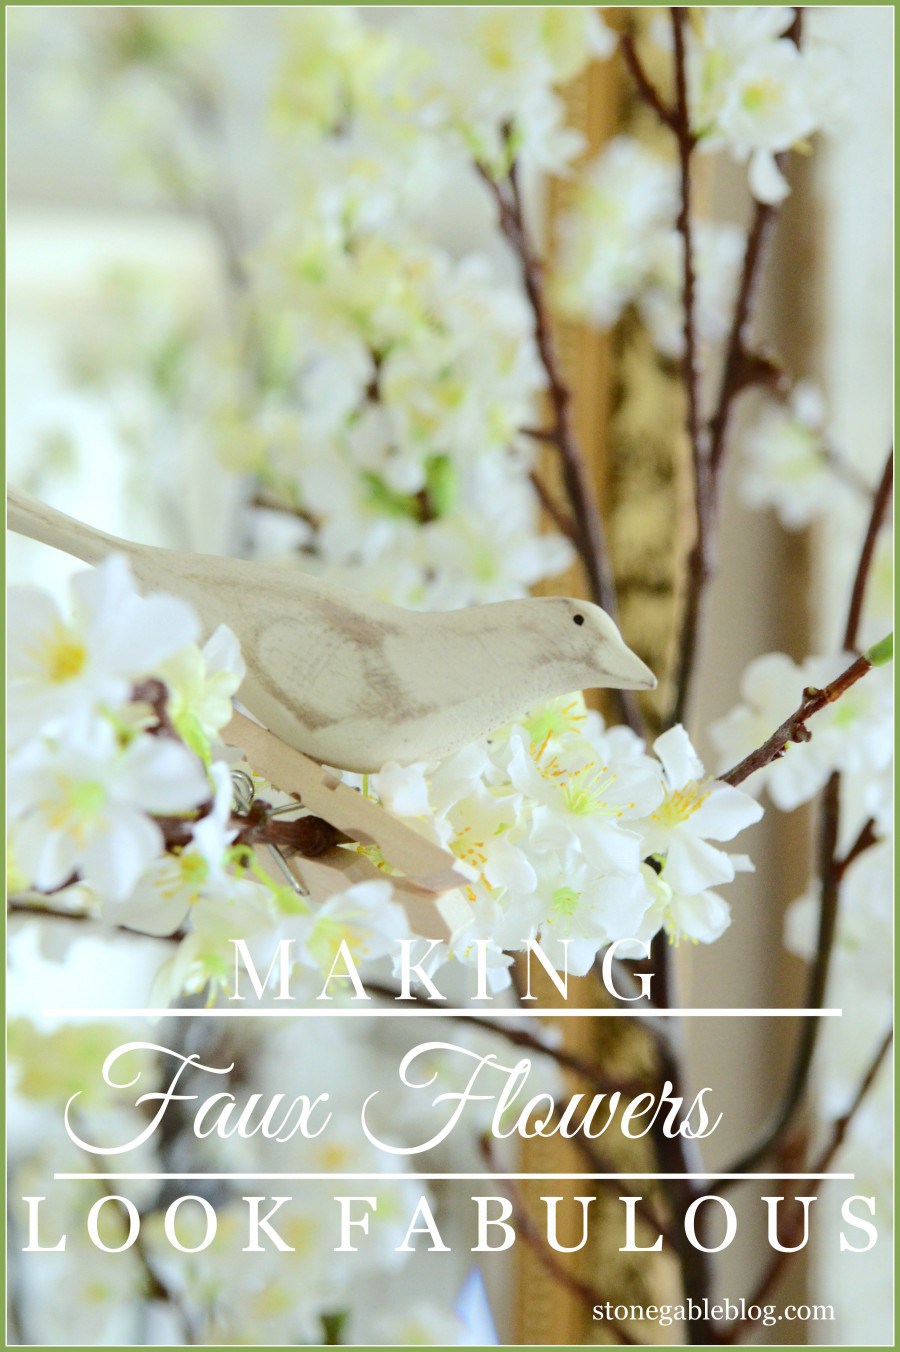 MARCH IS A GREAT MONTH TO... Find lots of fun and creative things to do and make for your home!